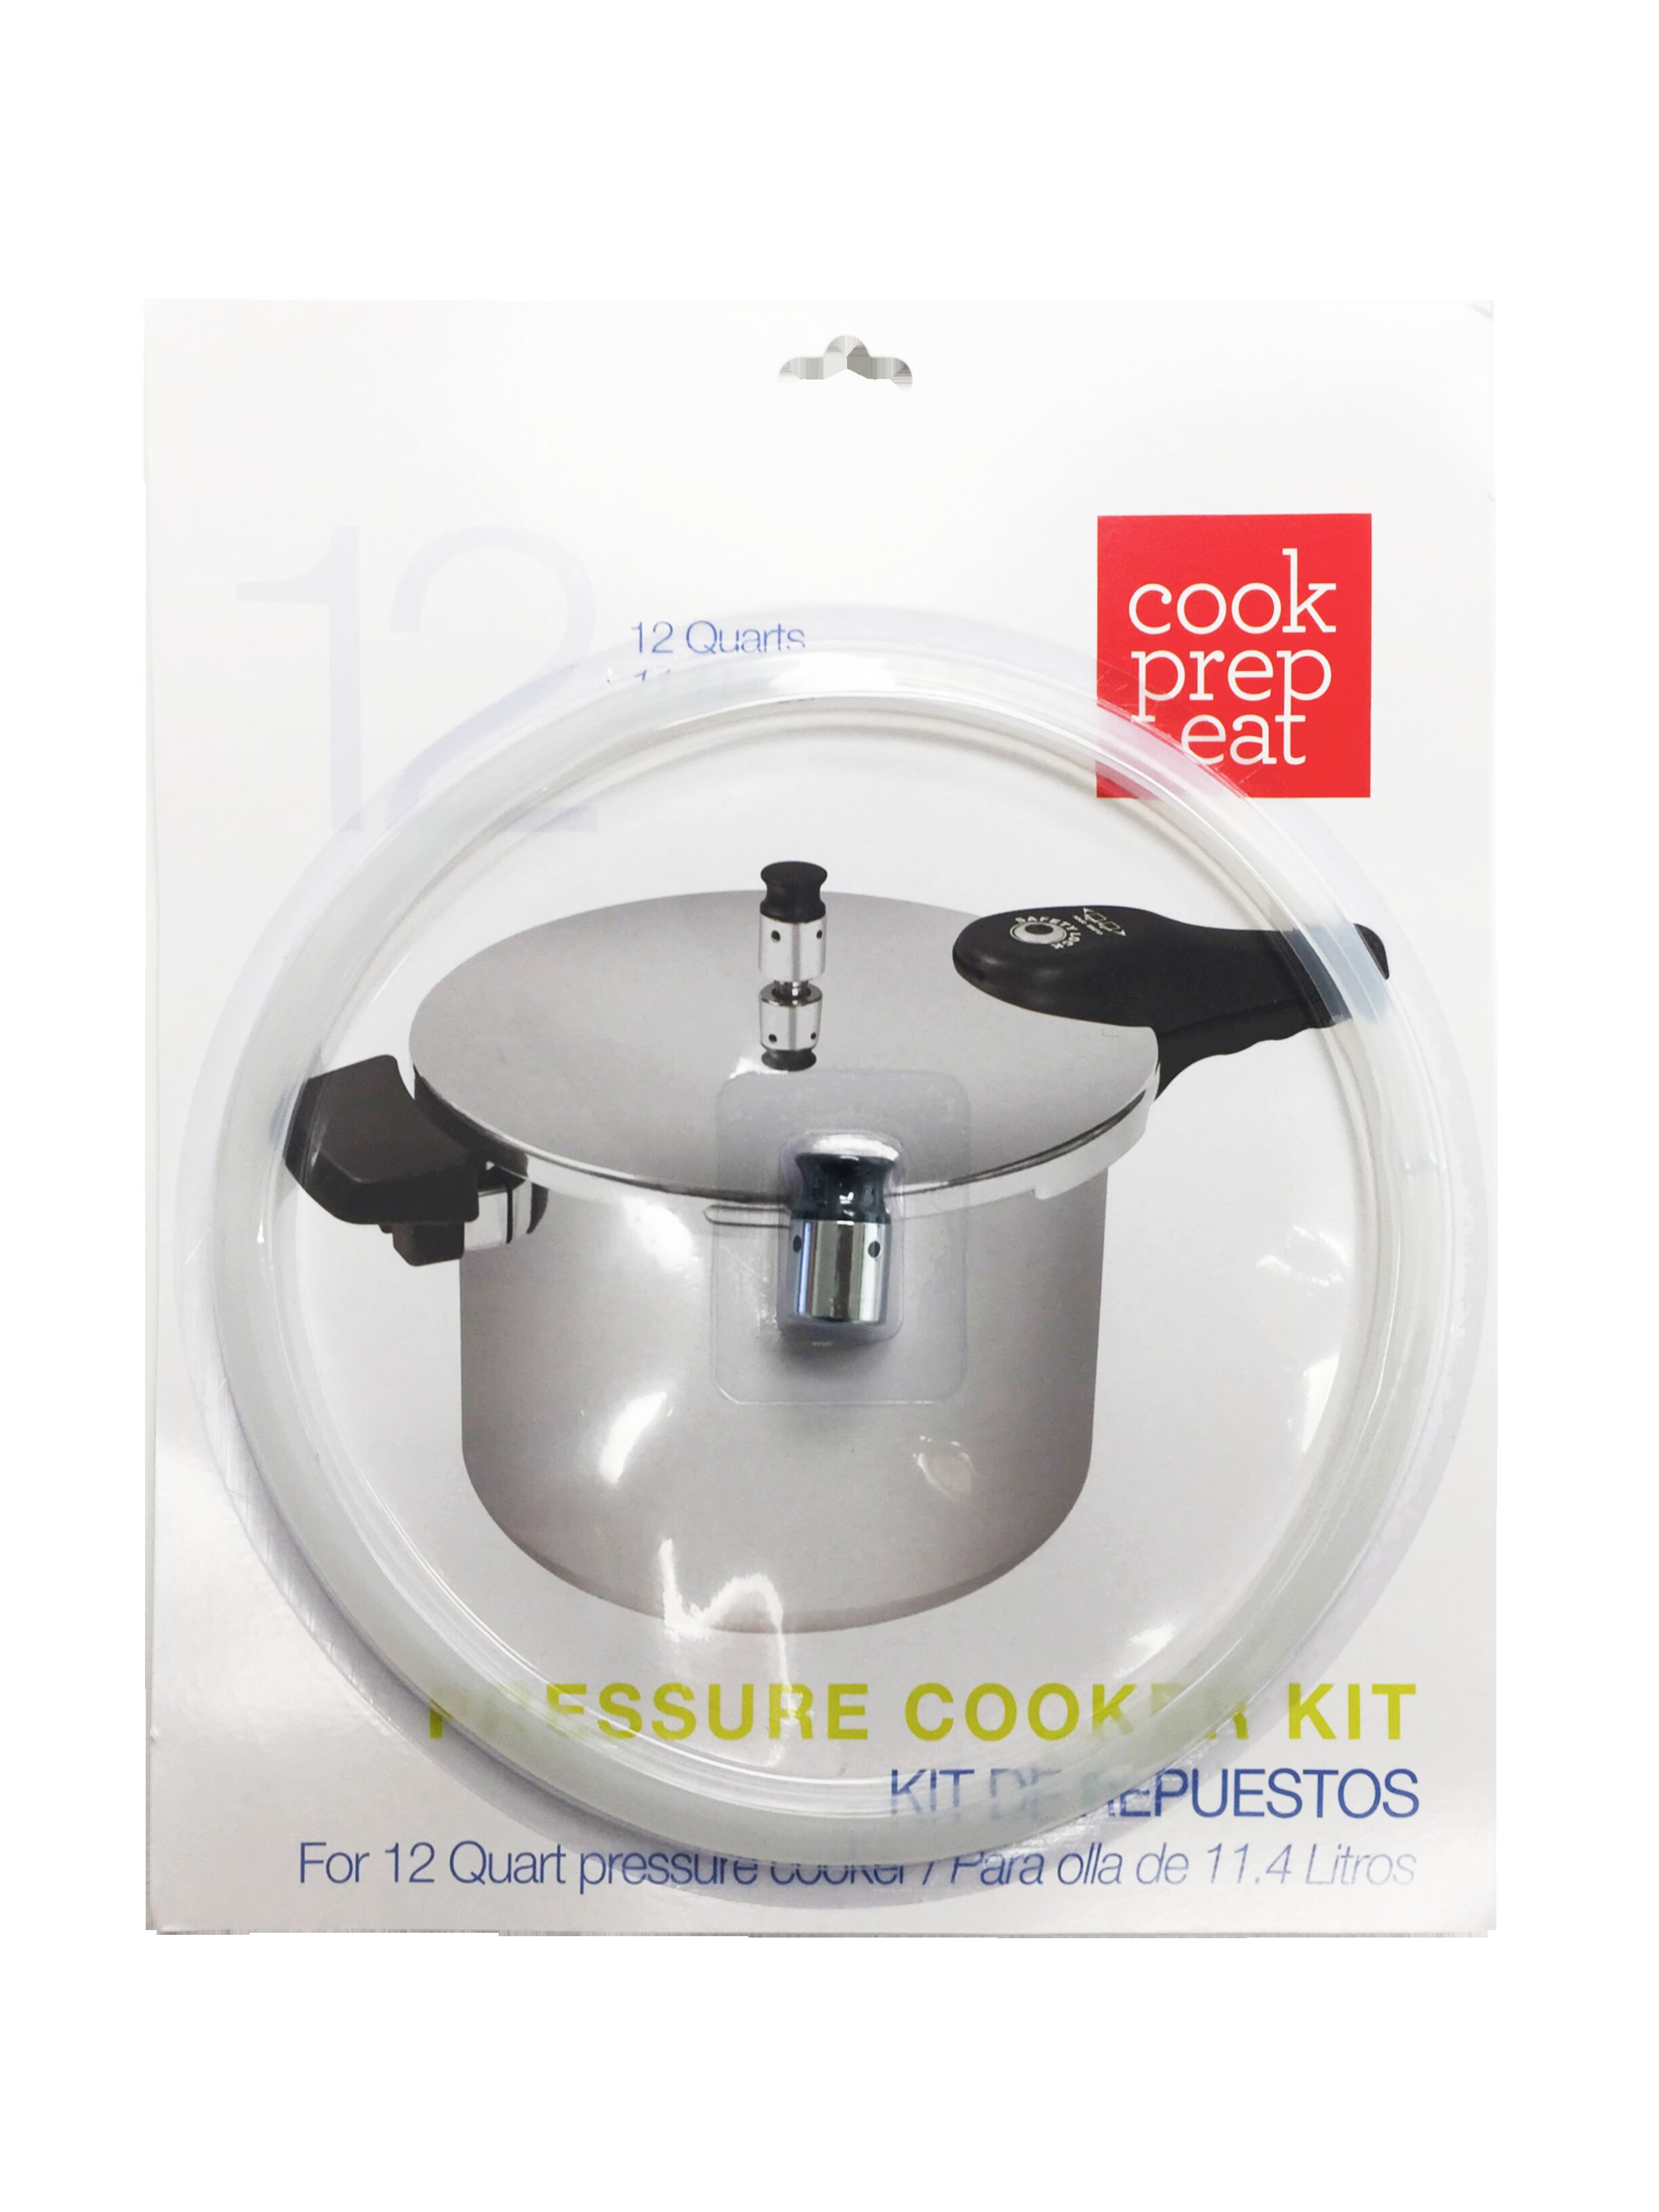 Cook Prep Eat Pressure Cooker Replacement Part Kits